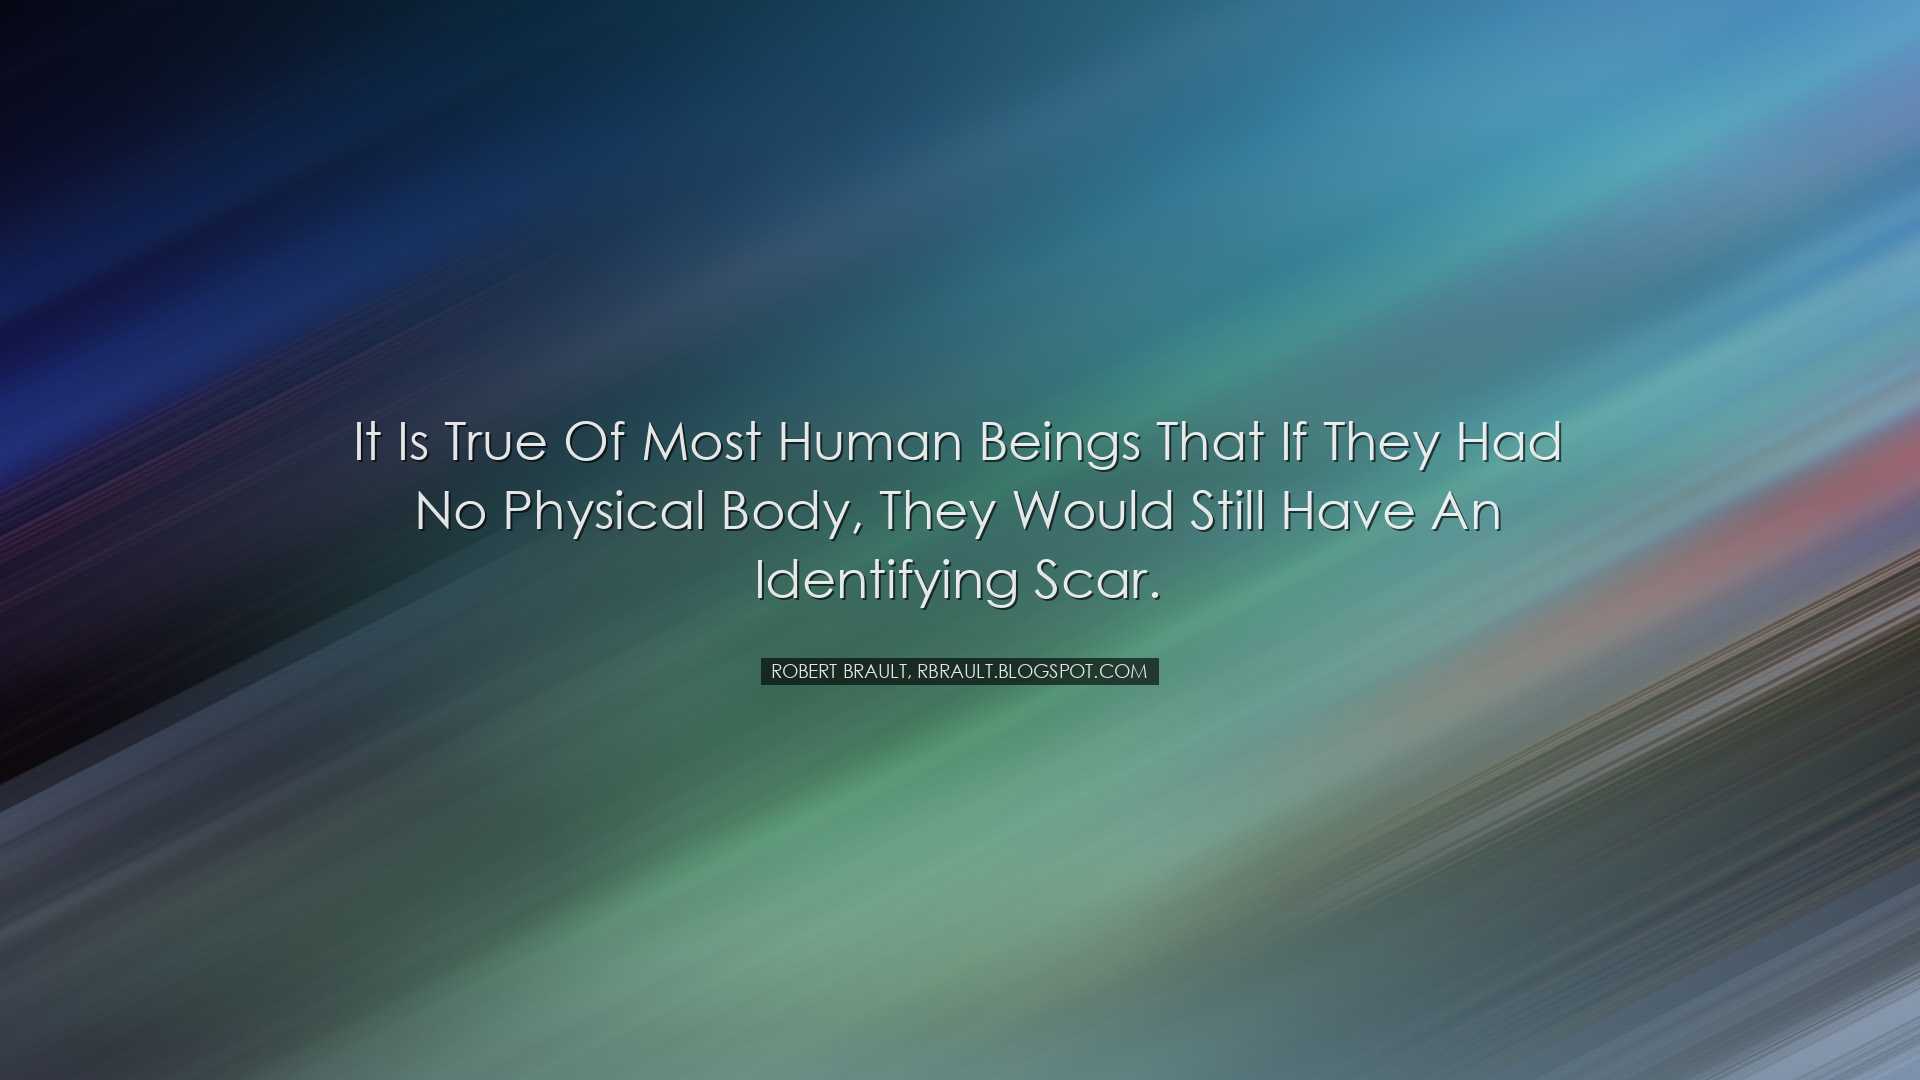 It is true of most human beings that if they had no physical body,